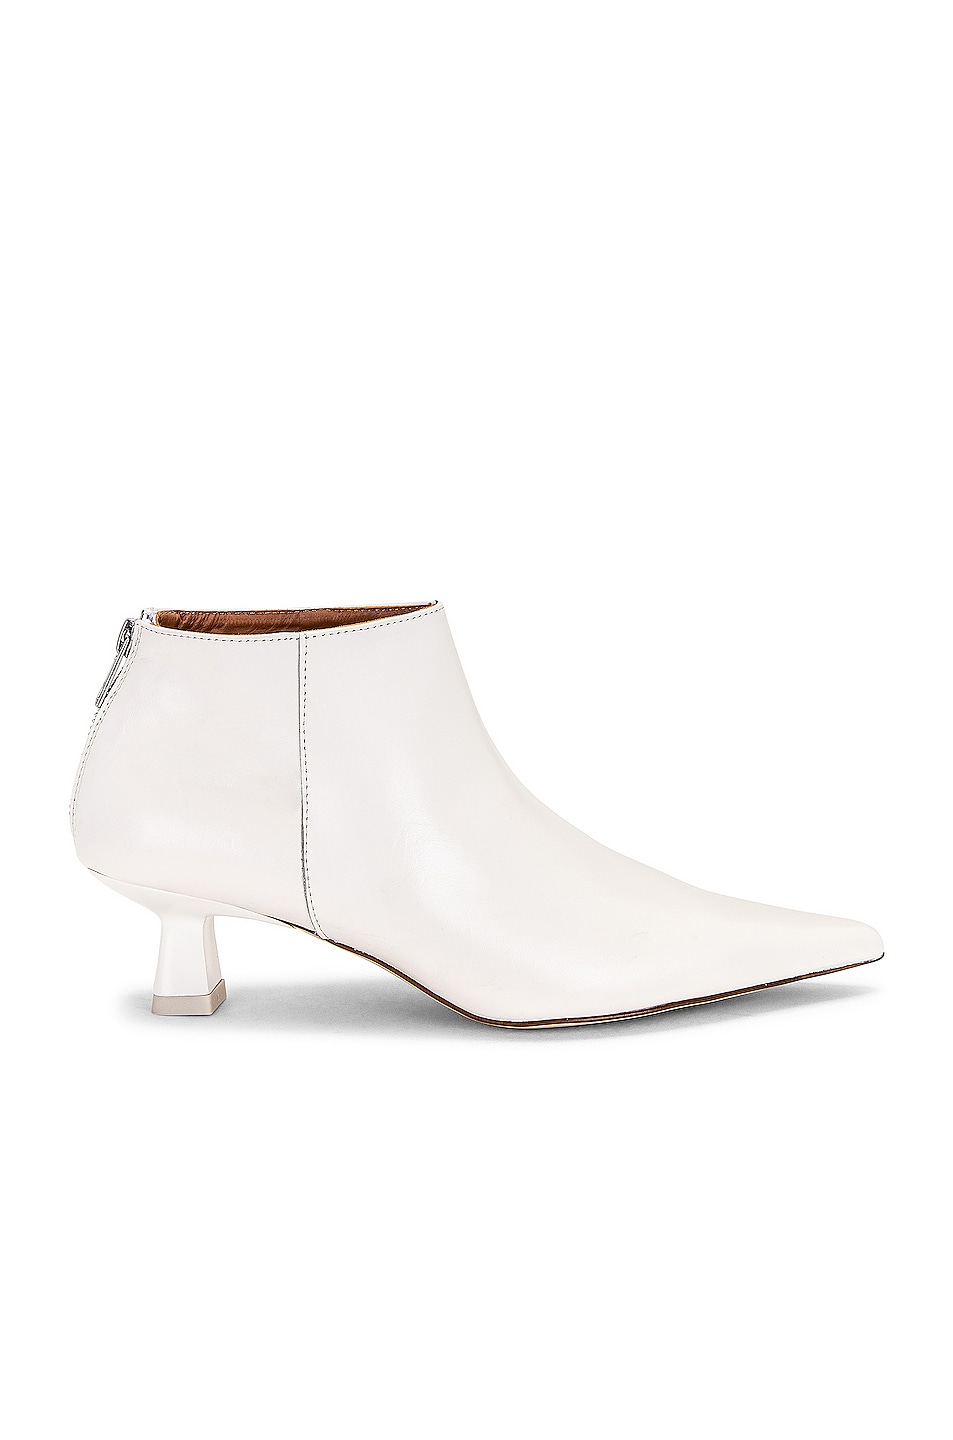 Image 1 of Ganni Soft Pointy Crop Boot in Egret